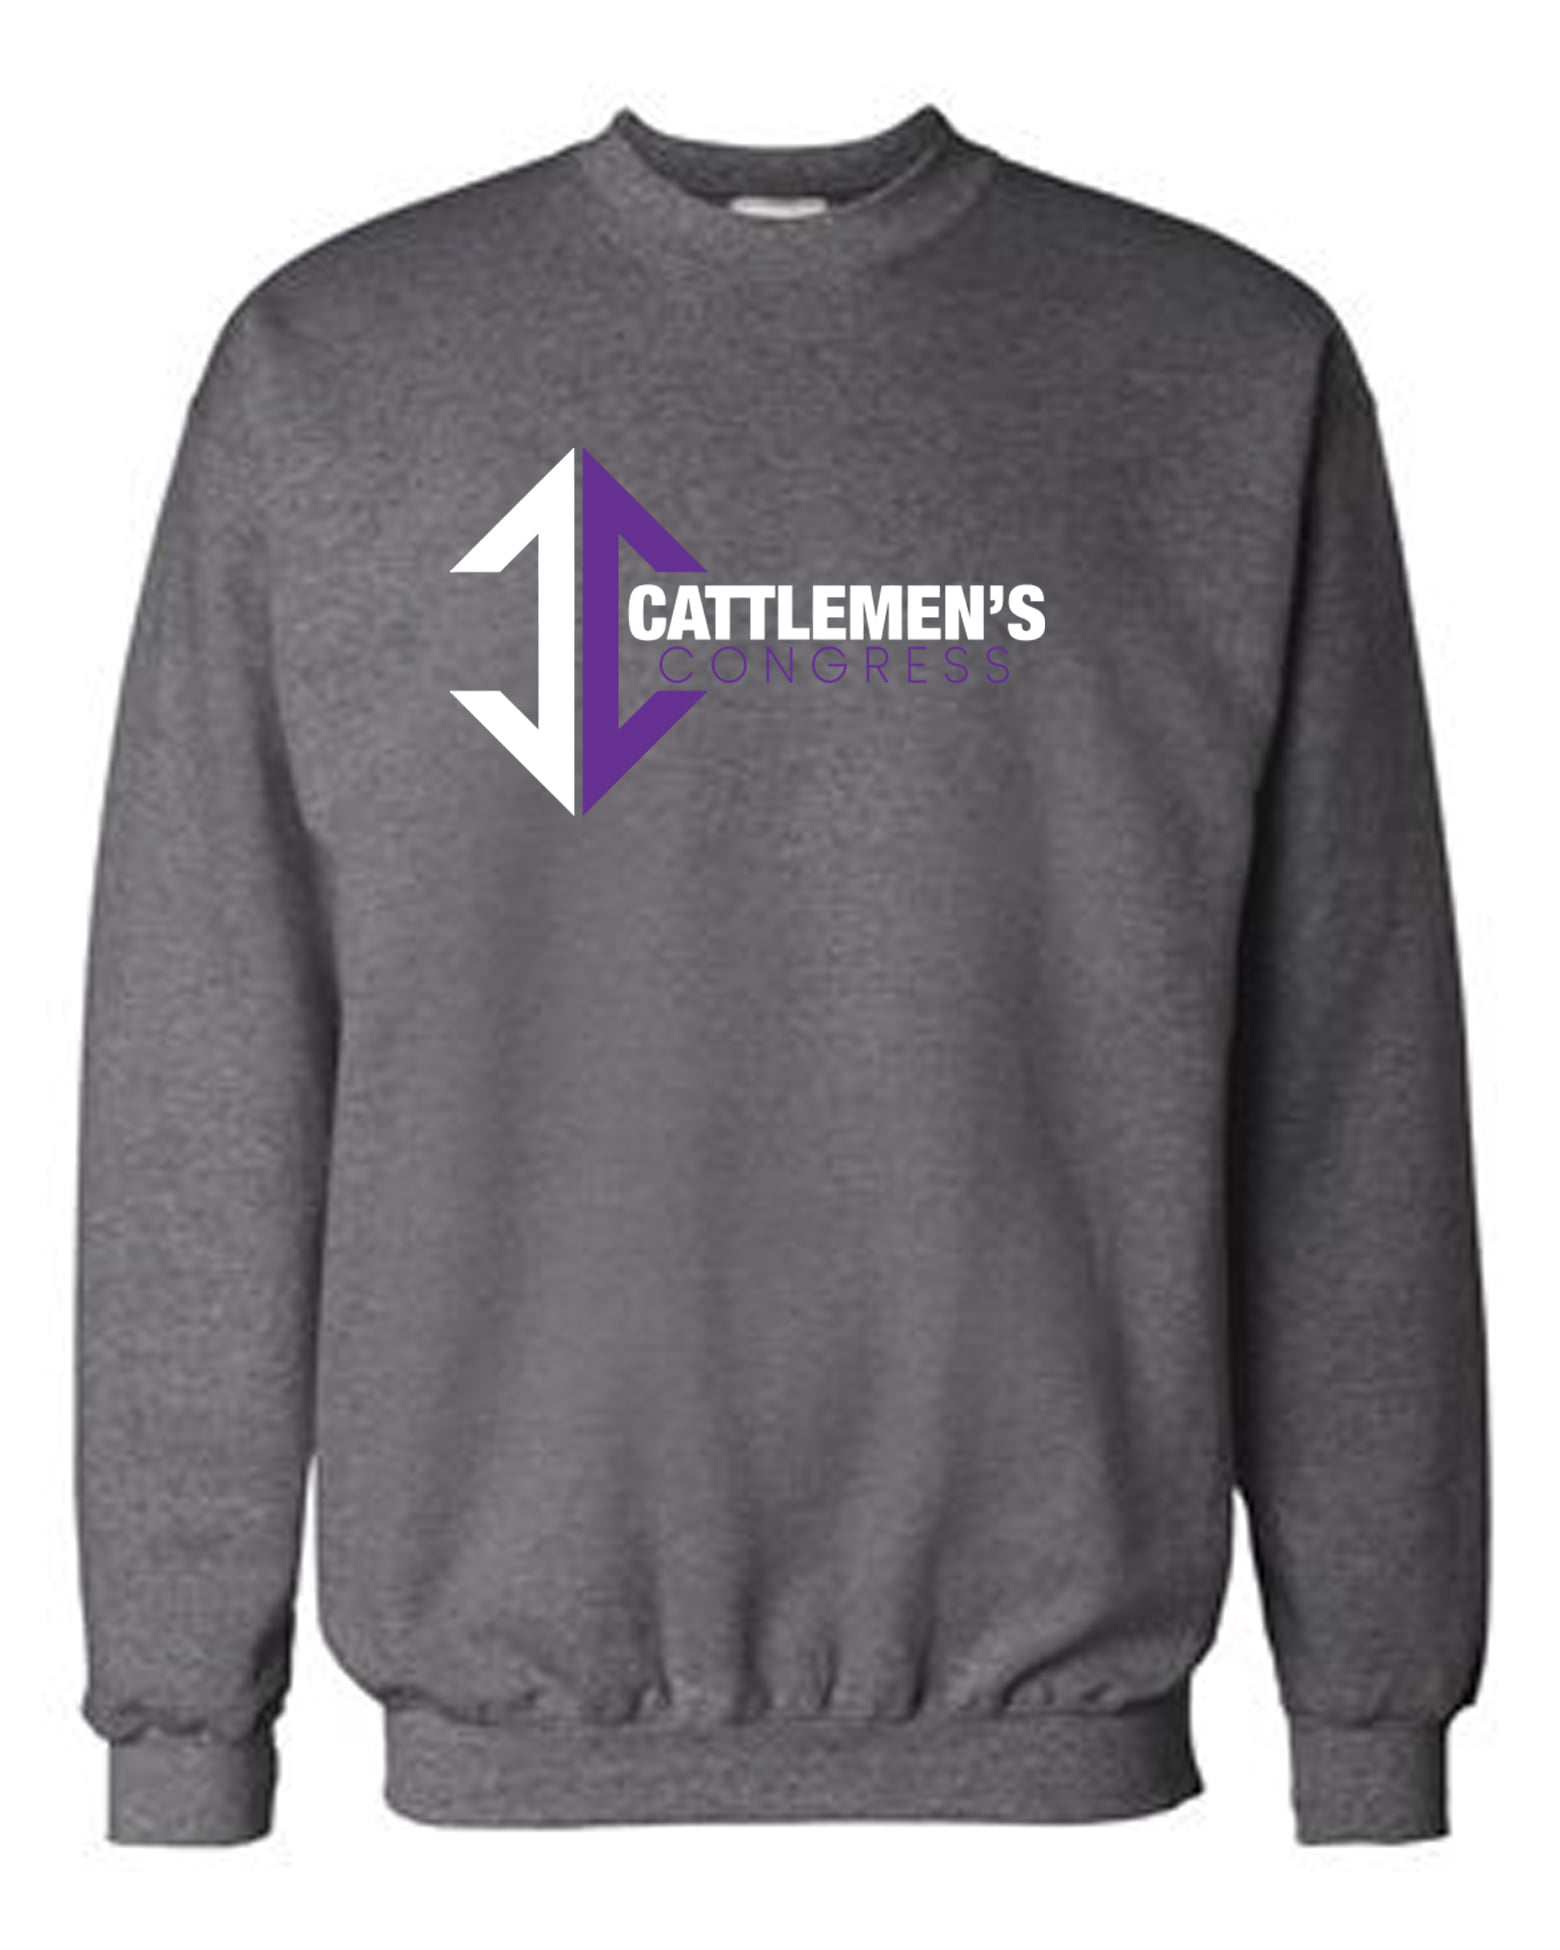 Cattlemen’s Congress Merchandise Pre-Orders Available | The Pulse